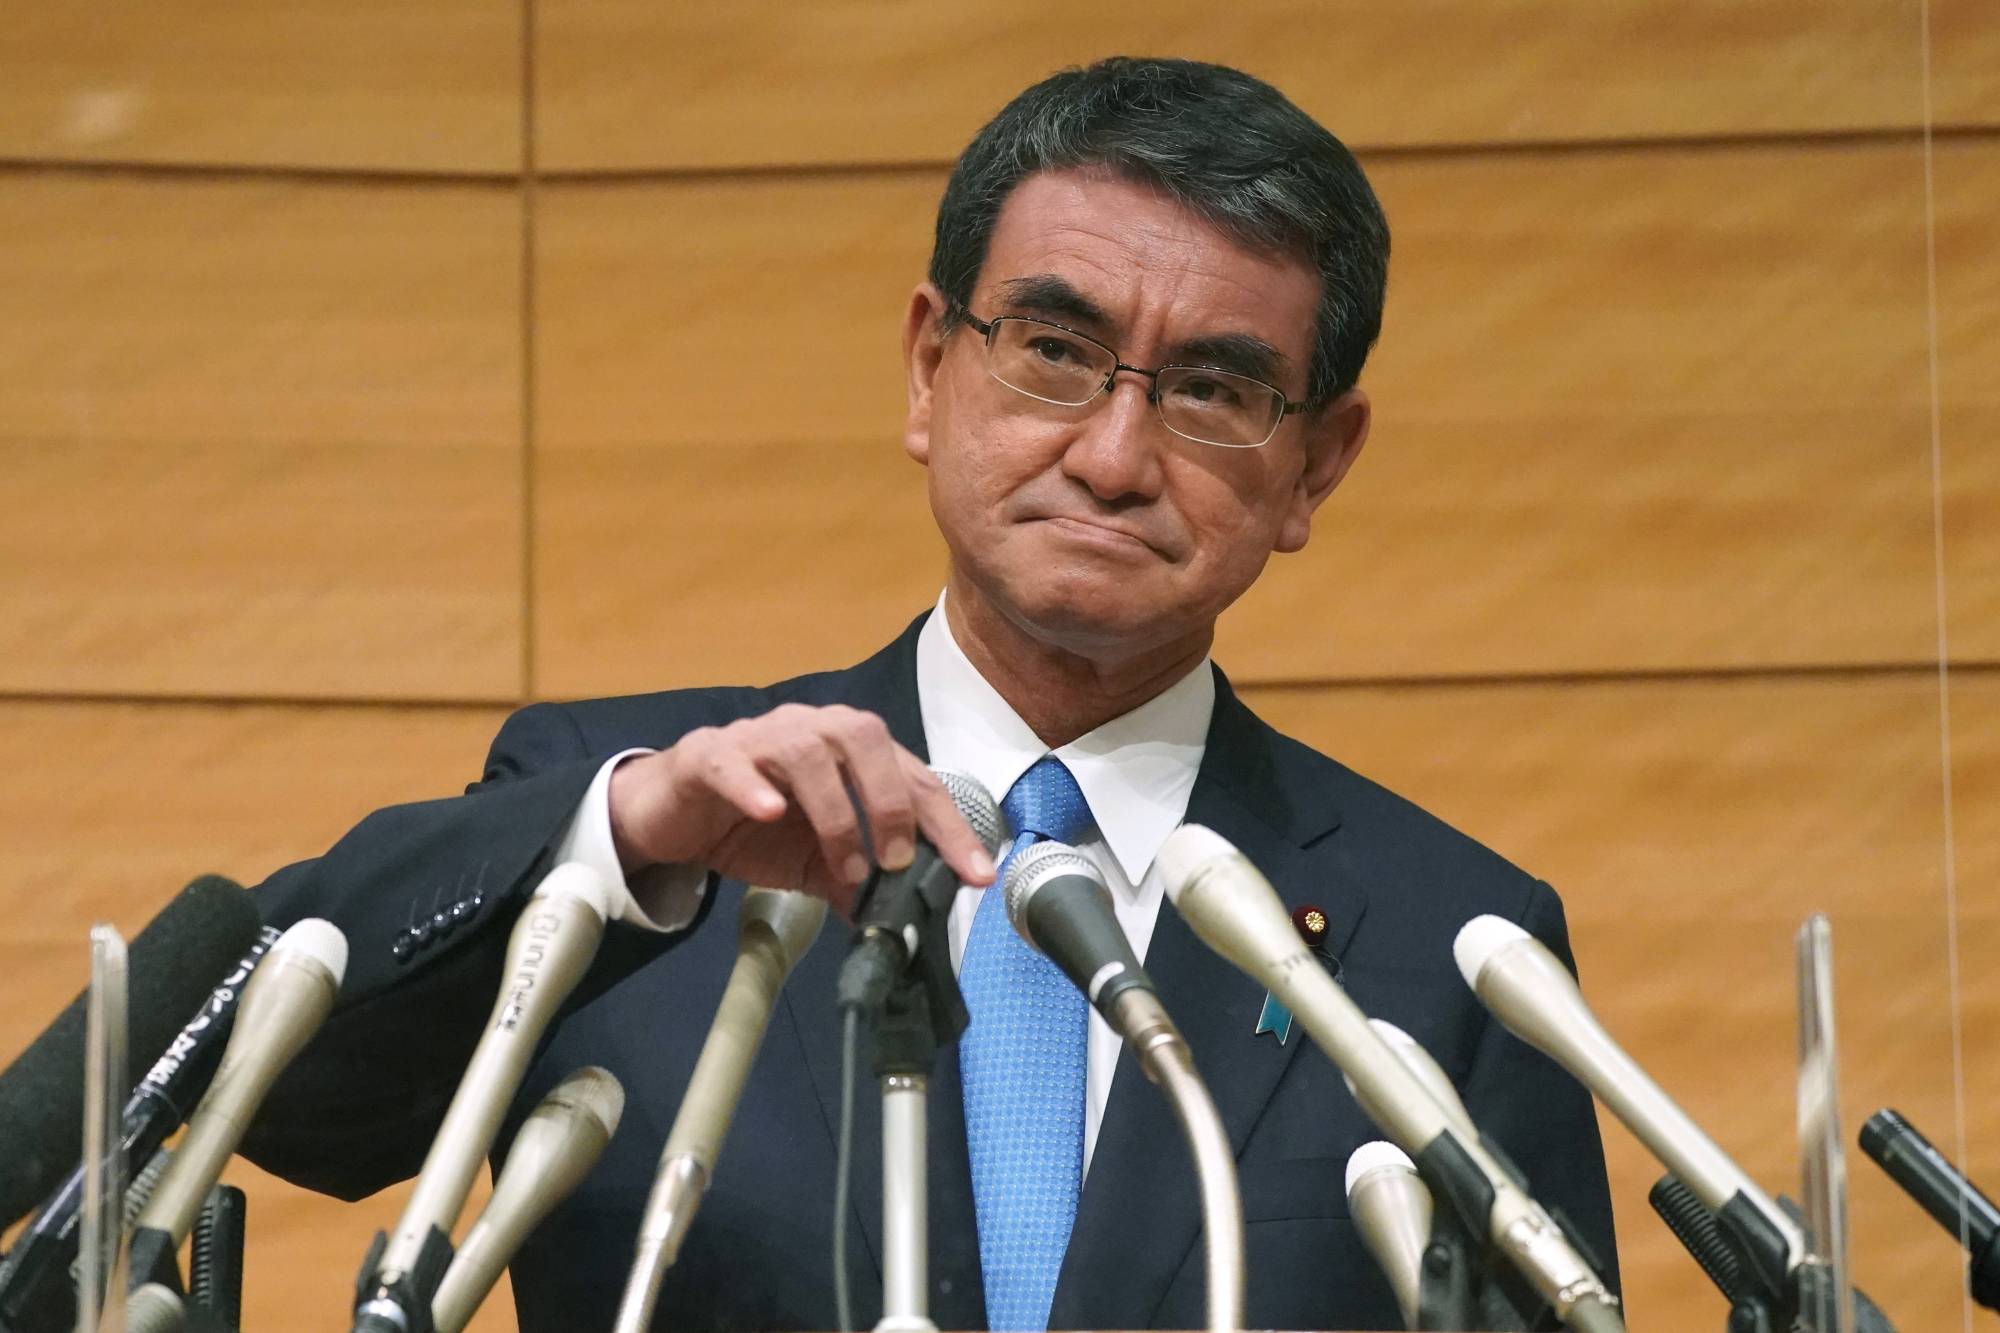 Taro Kono's reputation as a maverick is built upon tension between himself and the old LDP guard, but he appears to be moderating positions to accommodate his opponents.  | BLOOMBERG